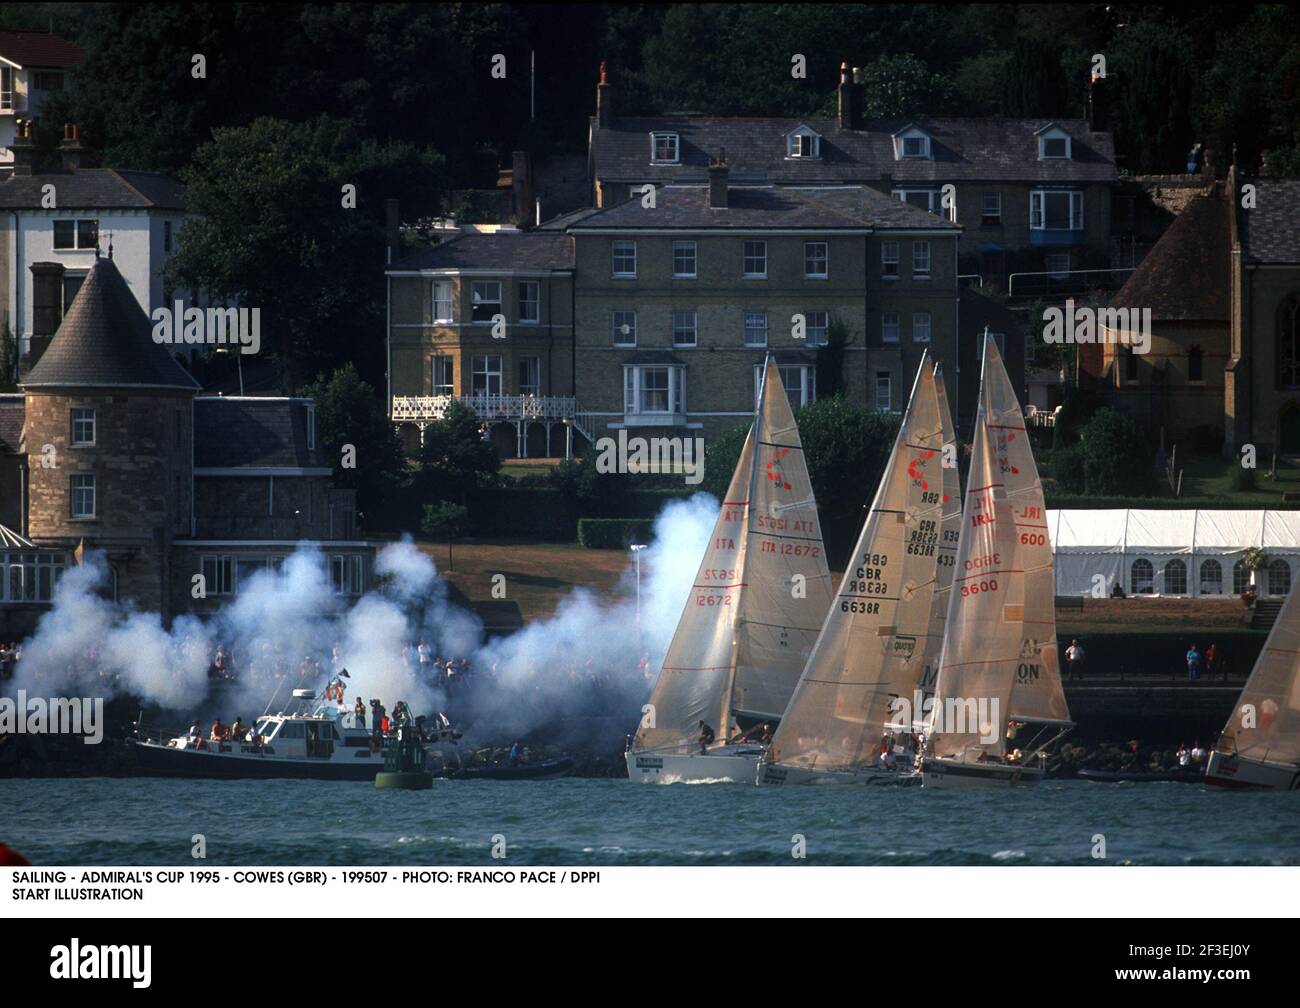 SEGELN - ADMIRAL'S CUP 1995 - COWES (GBR) - 199507 - FOTO: FRANCO PACE / DPPI START ILLUSTRATION Stockfoto